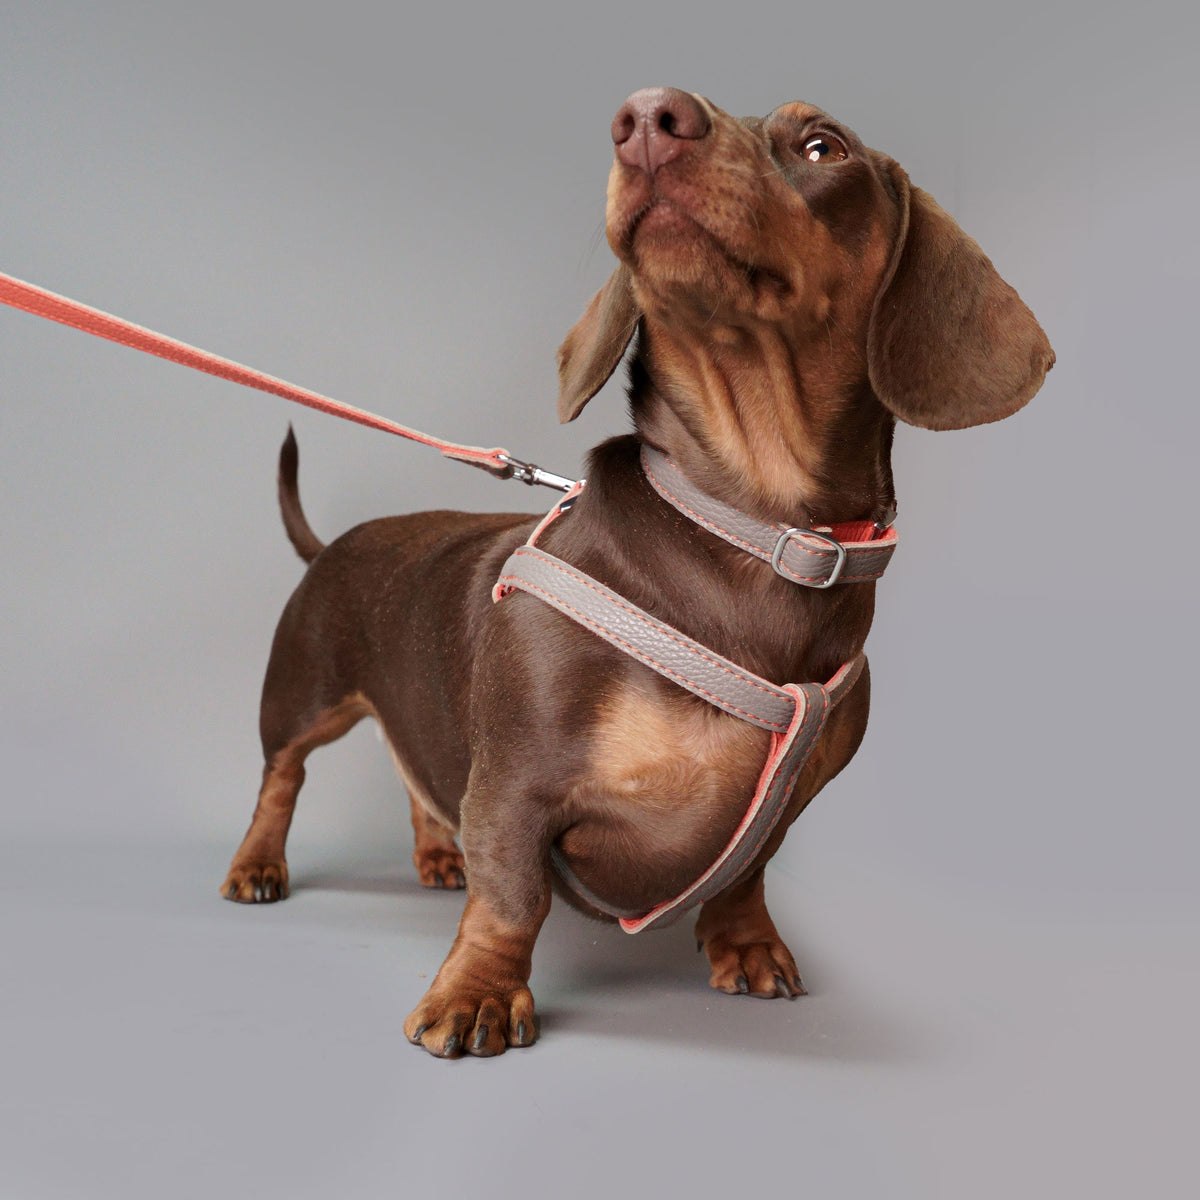 Leather Dog Harness - Grey and Coral - RYAN London